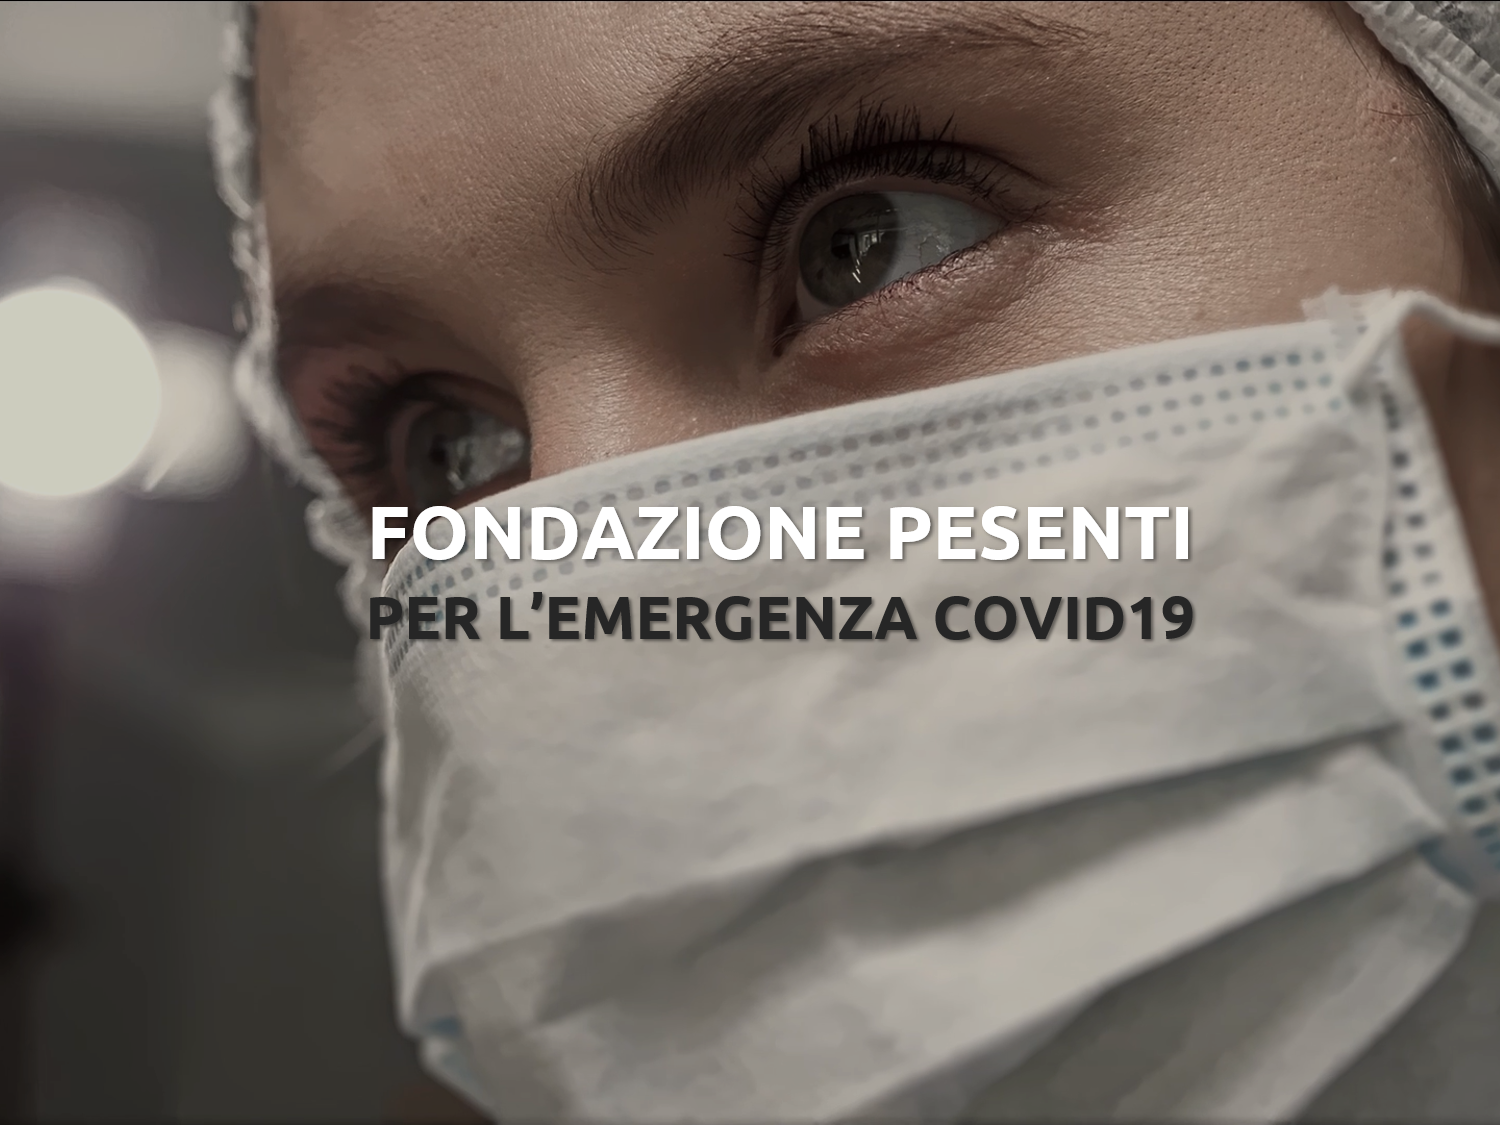 The Pesenti Foundation for the Covid19 Emergency